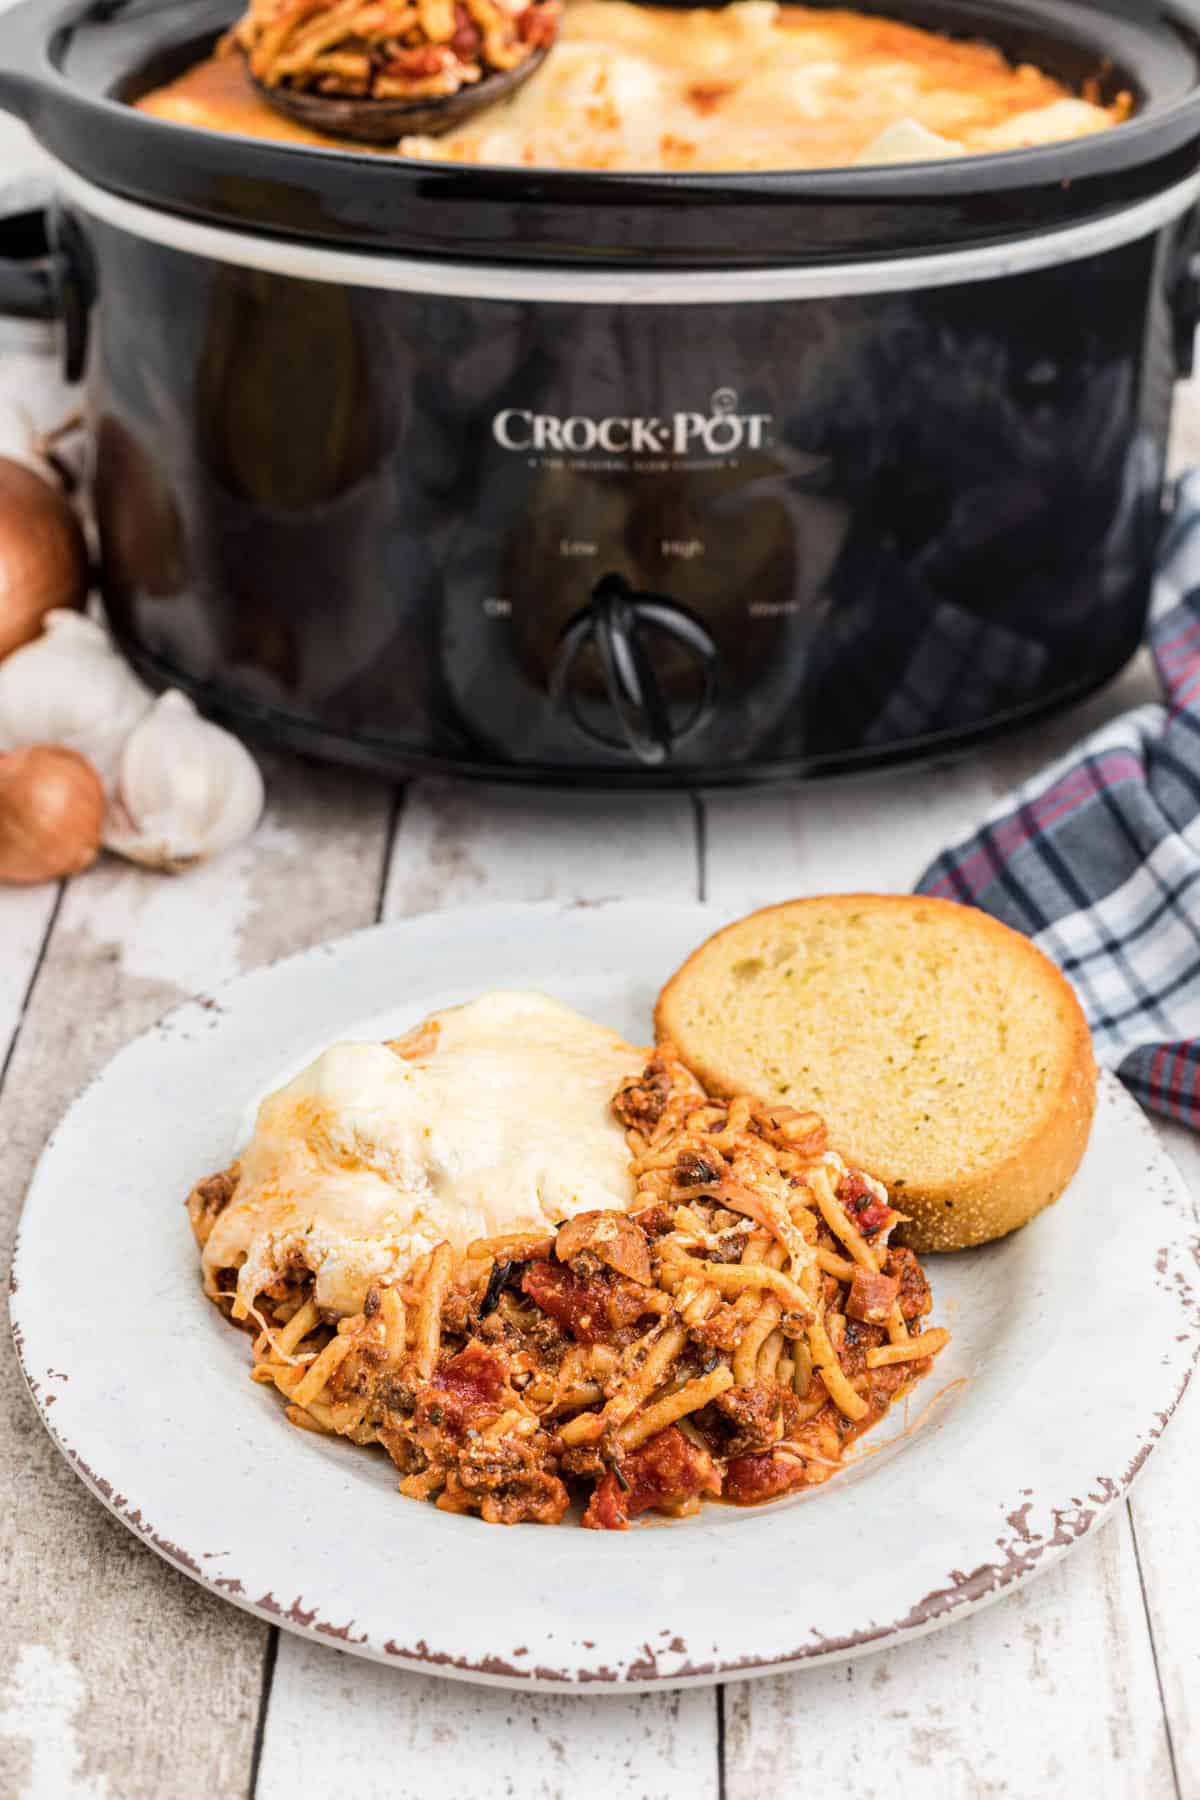 A plate topped with spaghetti and a slice of bread is placed next to a full Crockpot.